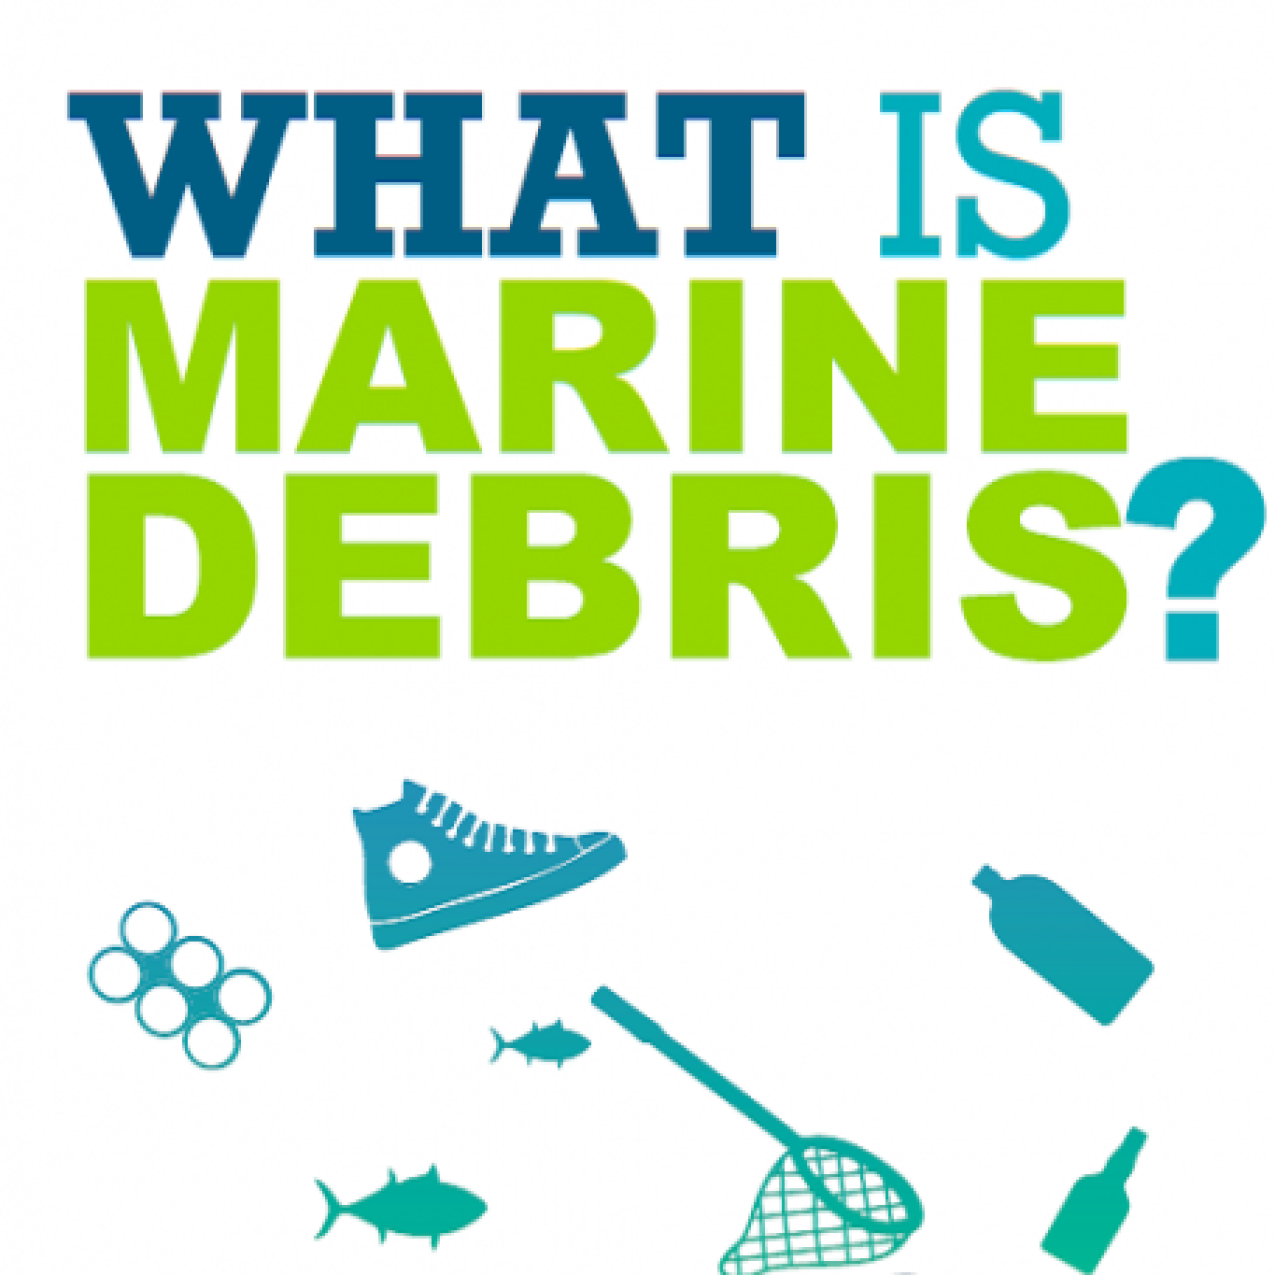 Graphics of ocean pollution, like glass and plastic bottles, a net, and a tire. Text: What is marine debris?